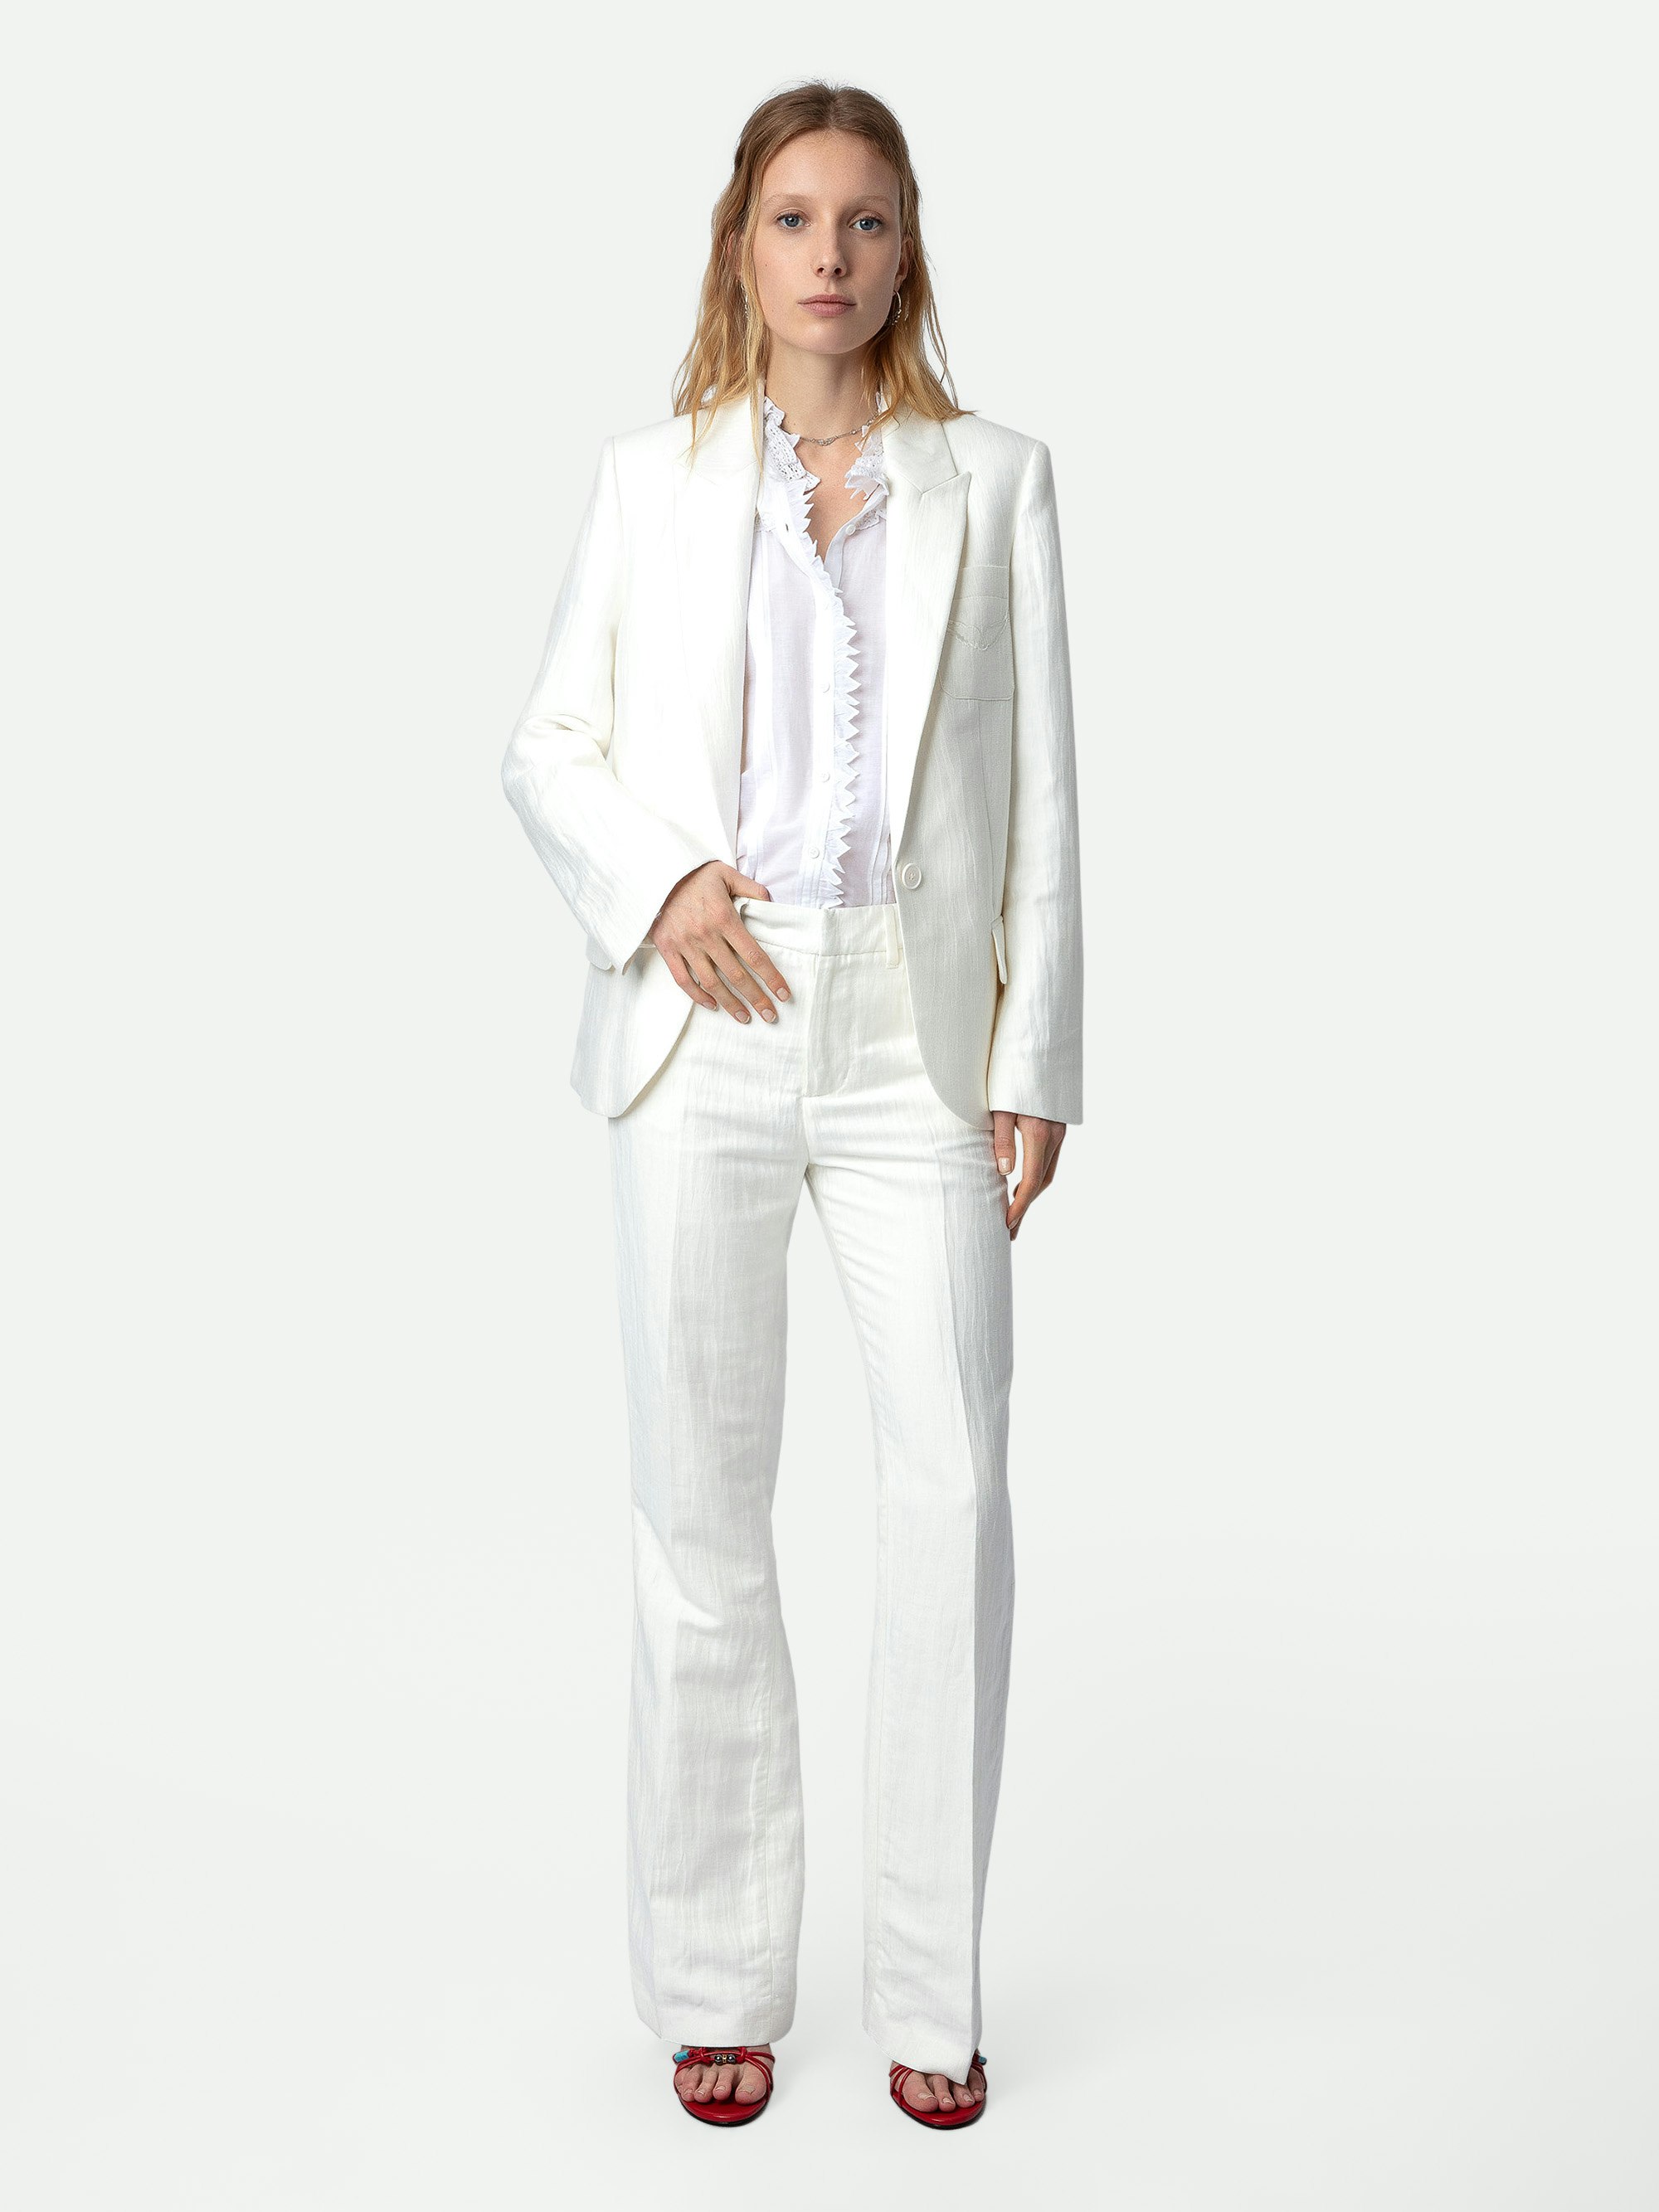 Vow Linen Blazer - White tailored blazer with tailored collar, button closure and pockets with wings motif.